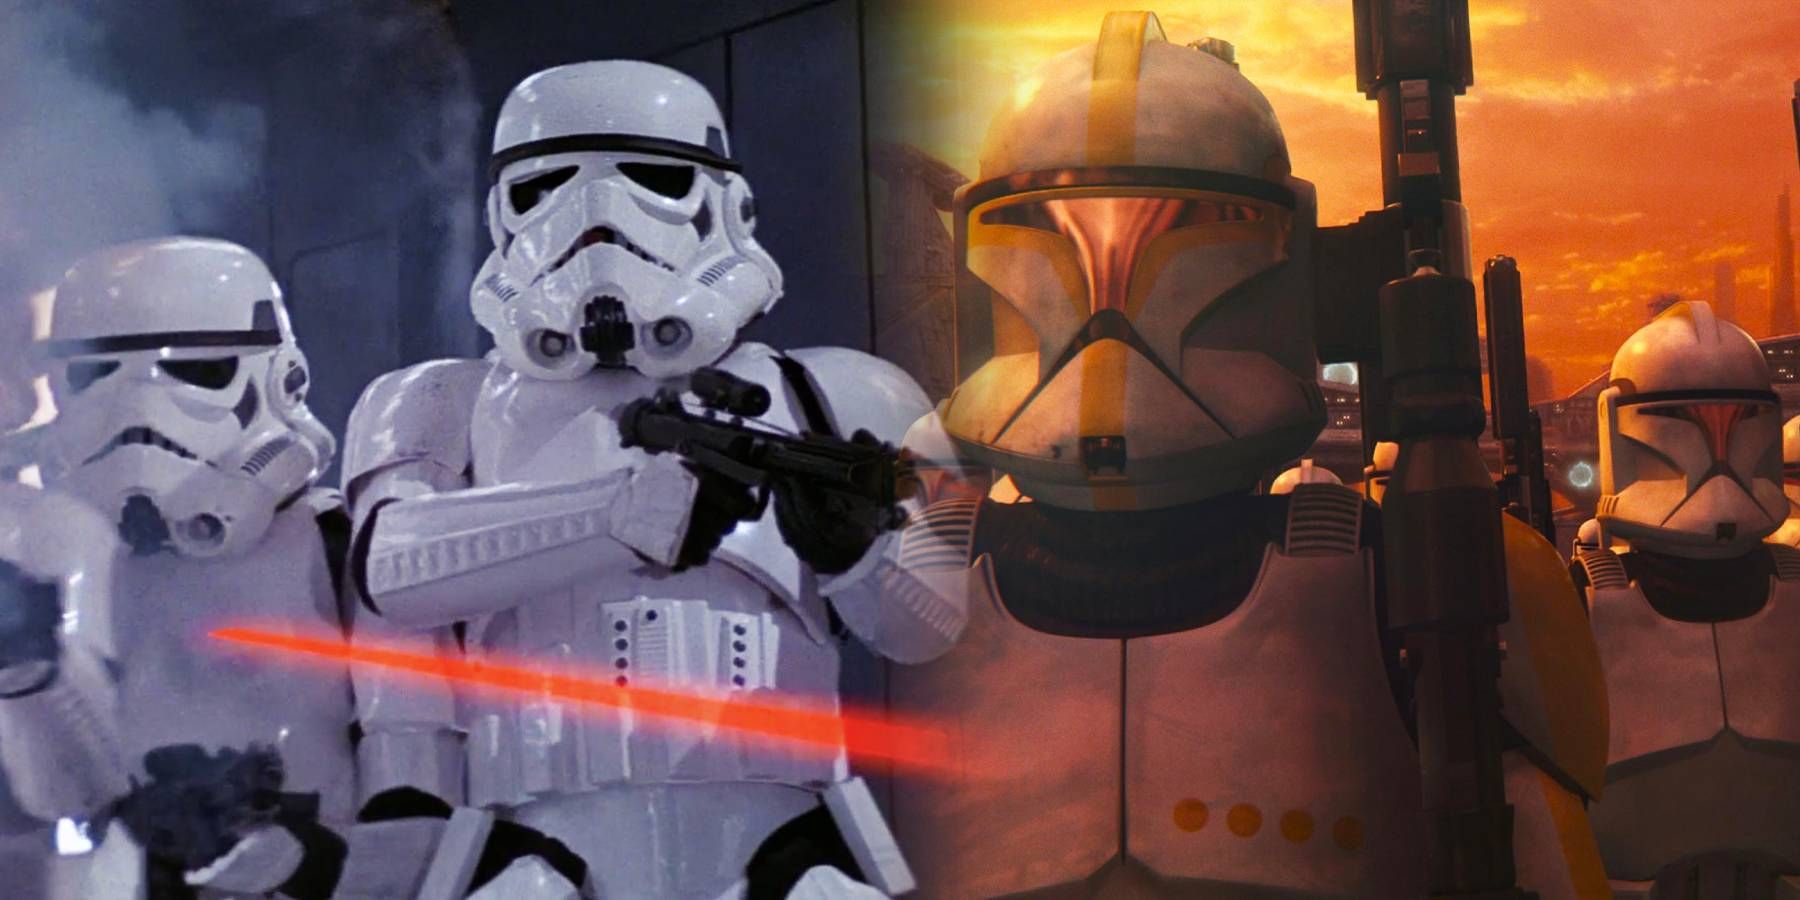 Stormtroopers and clone troopers from Star Wars